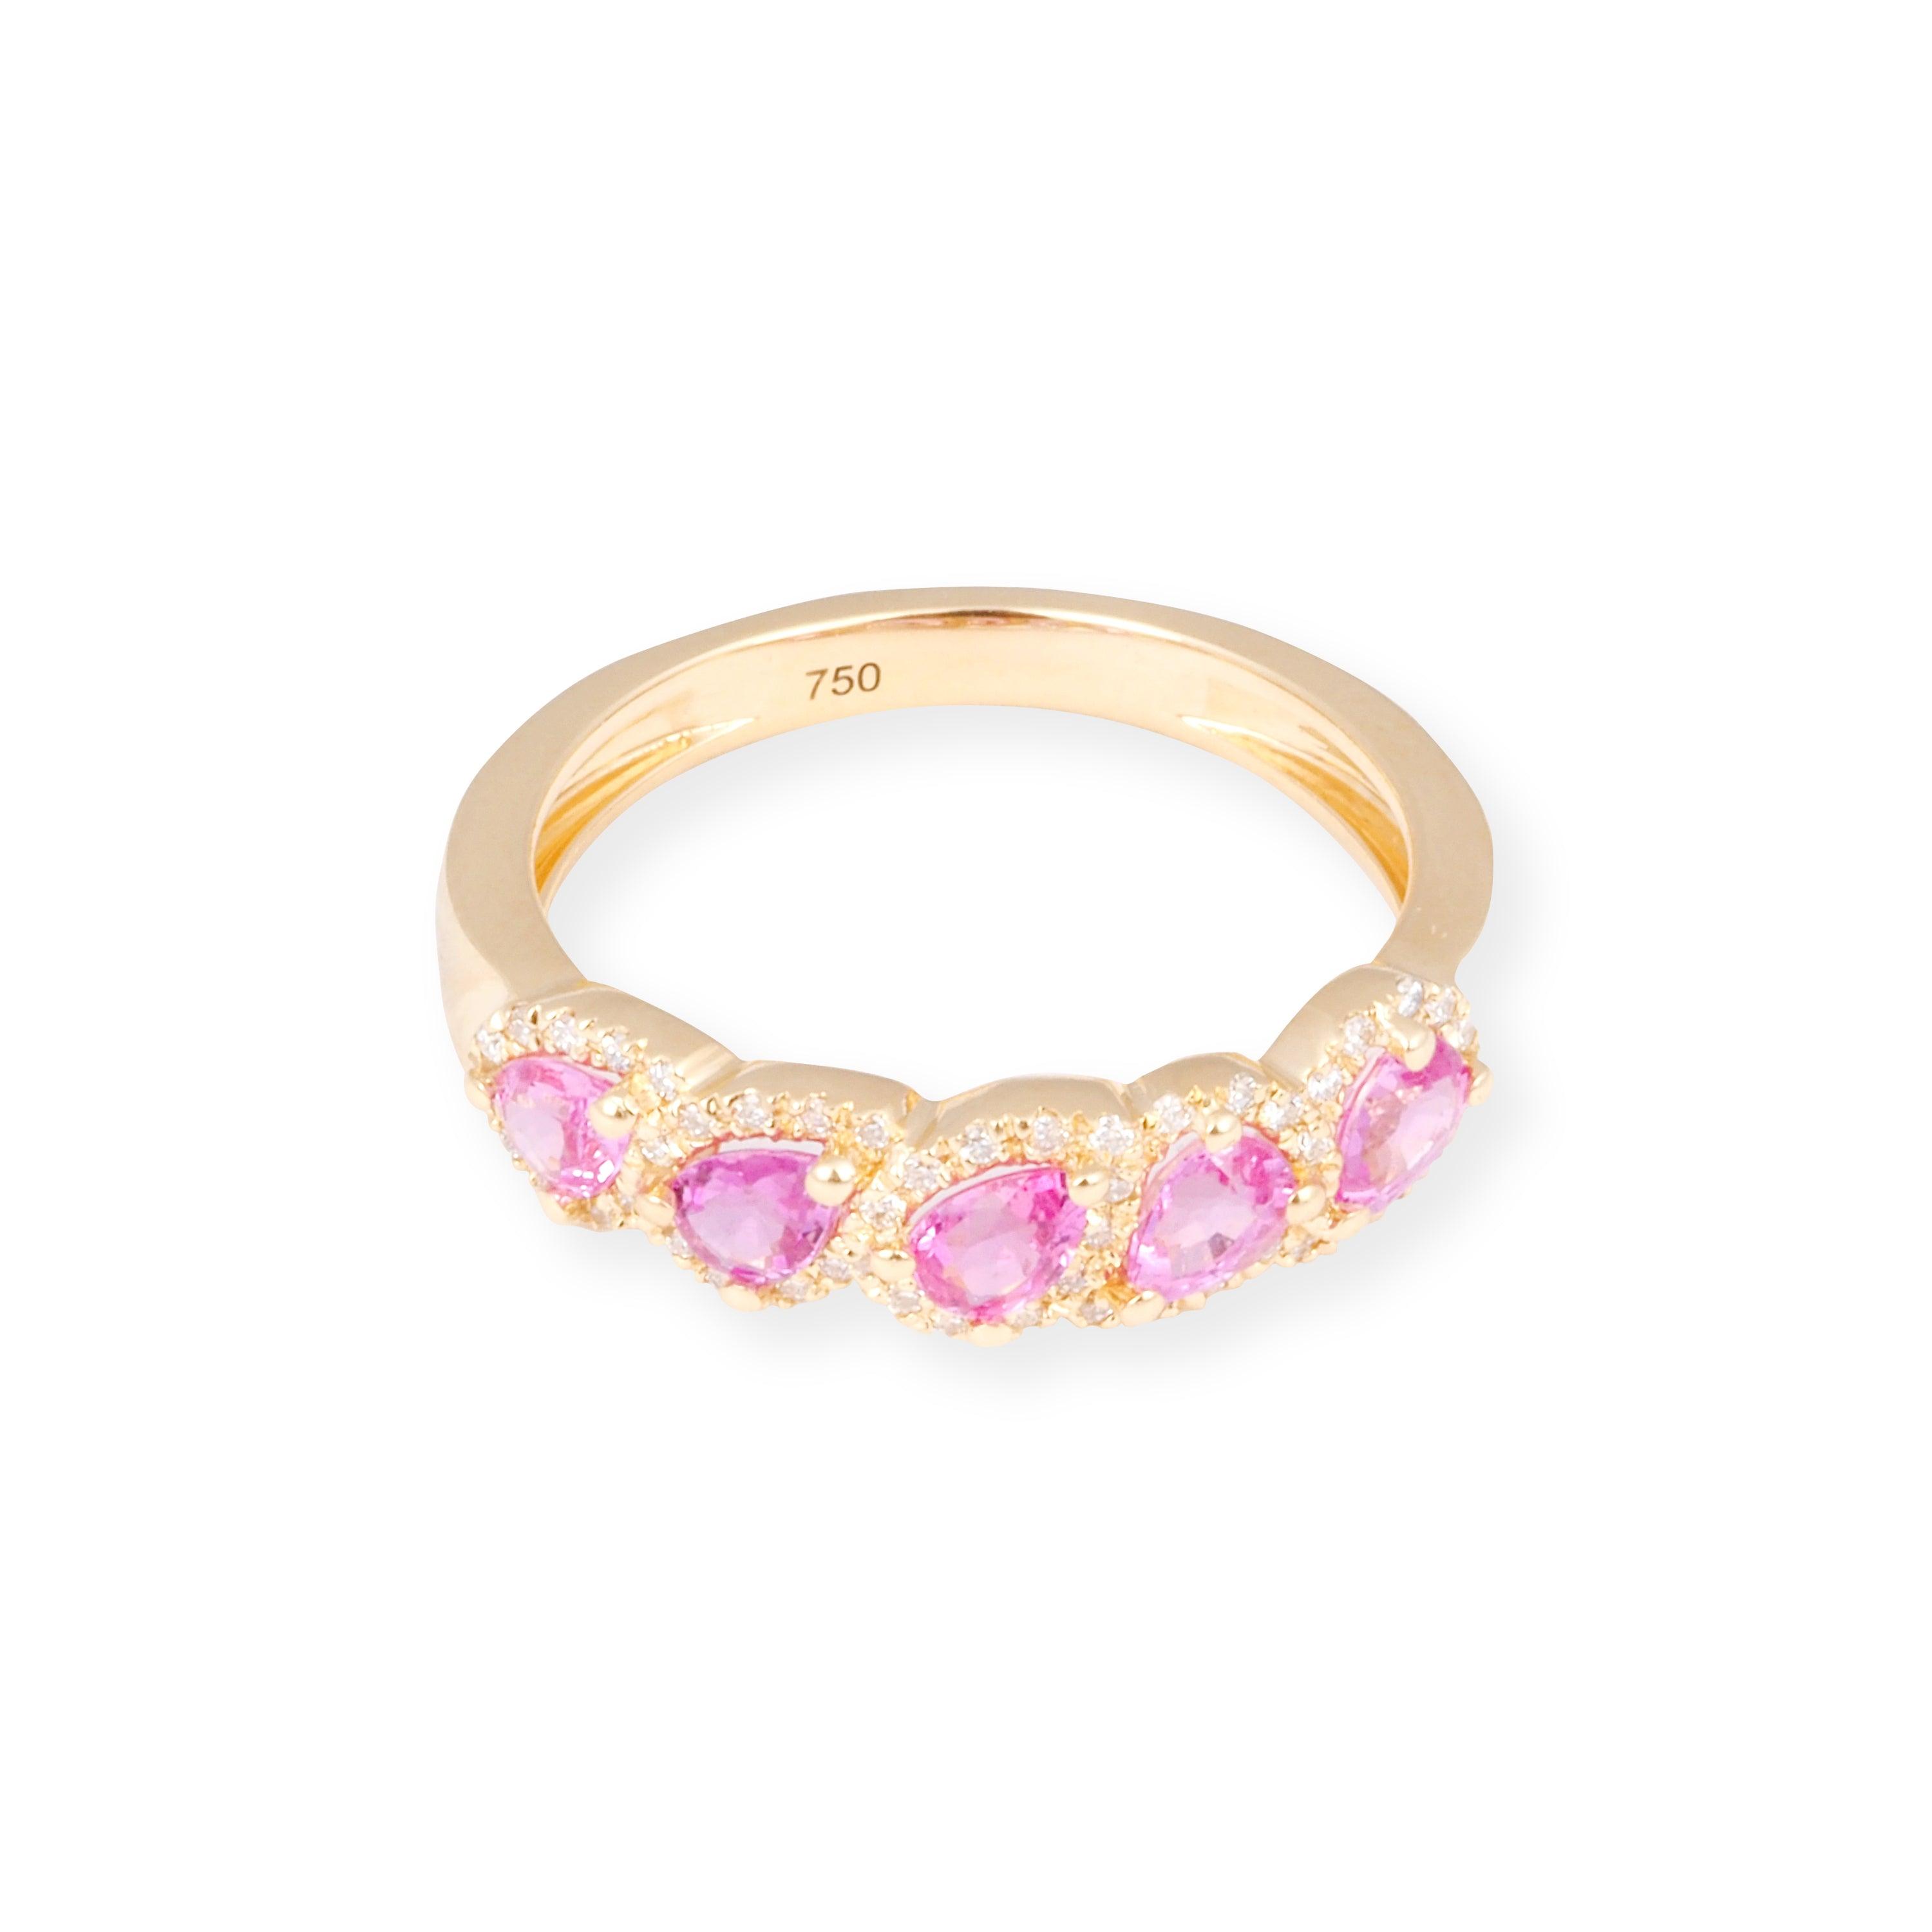 18ct Yellow Gold Ring with Diamonds and Pink Sapphires LR-7036 - Minar Jewellers